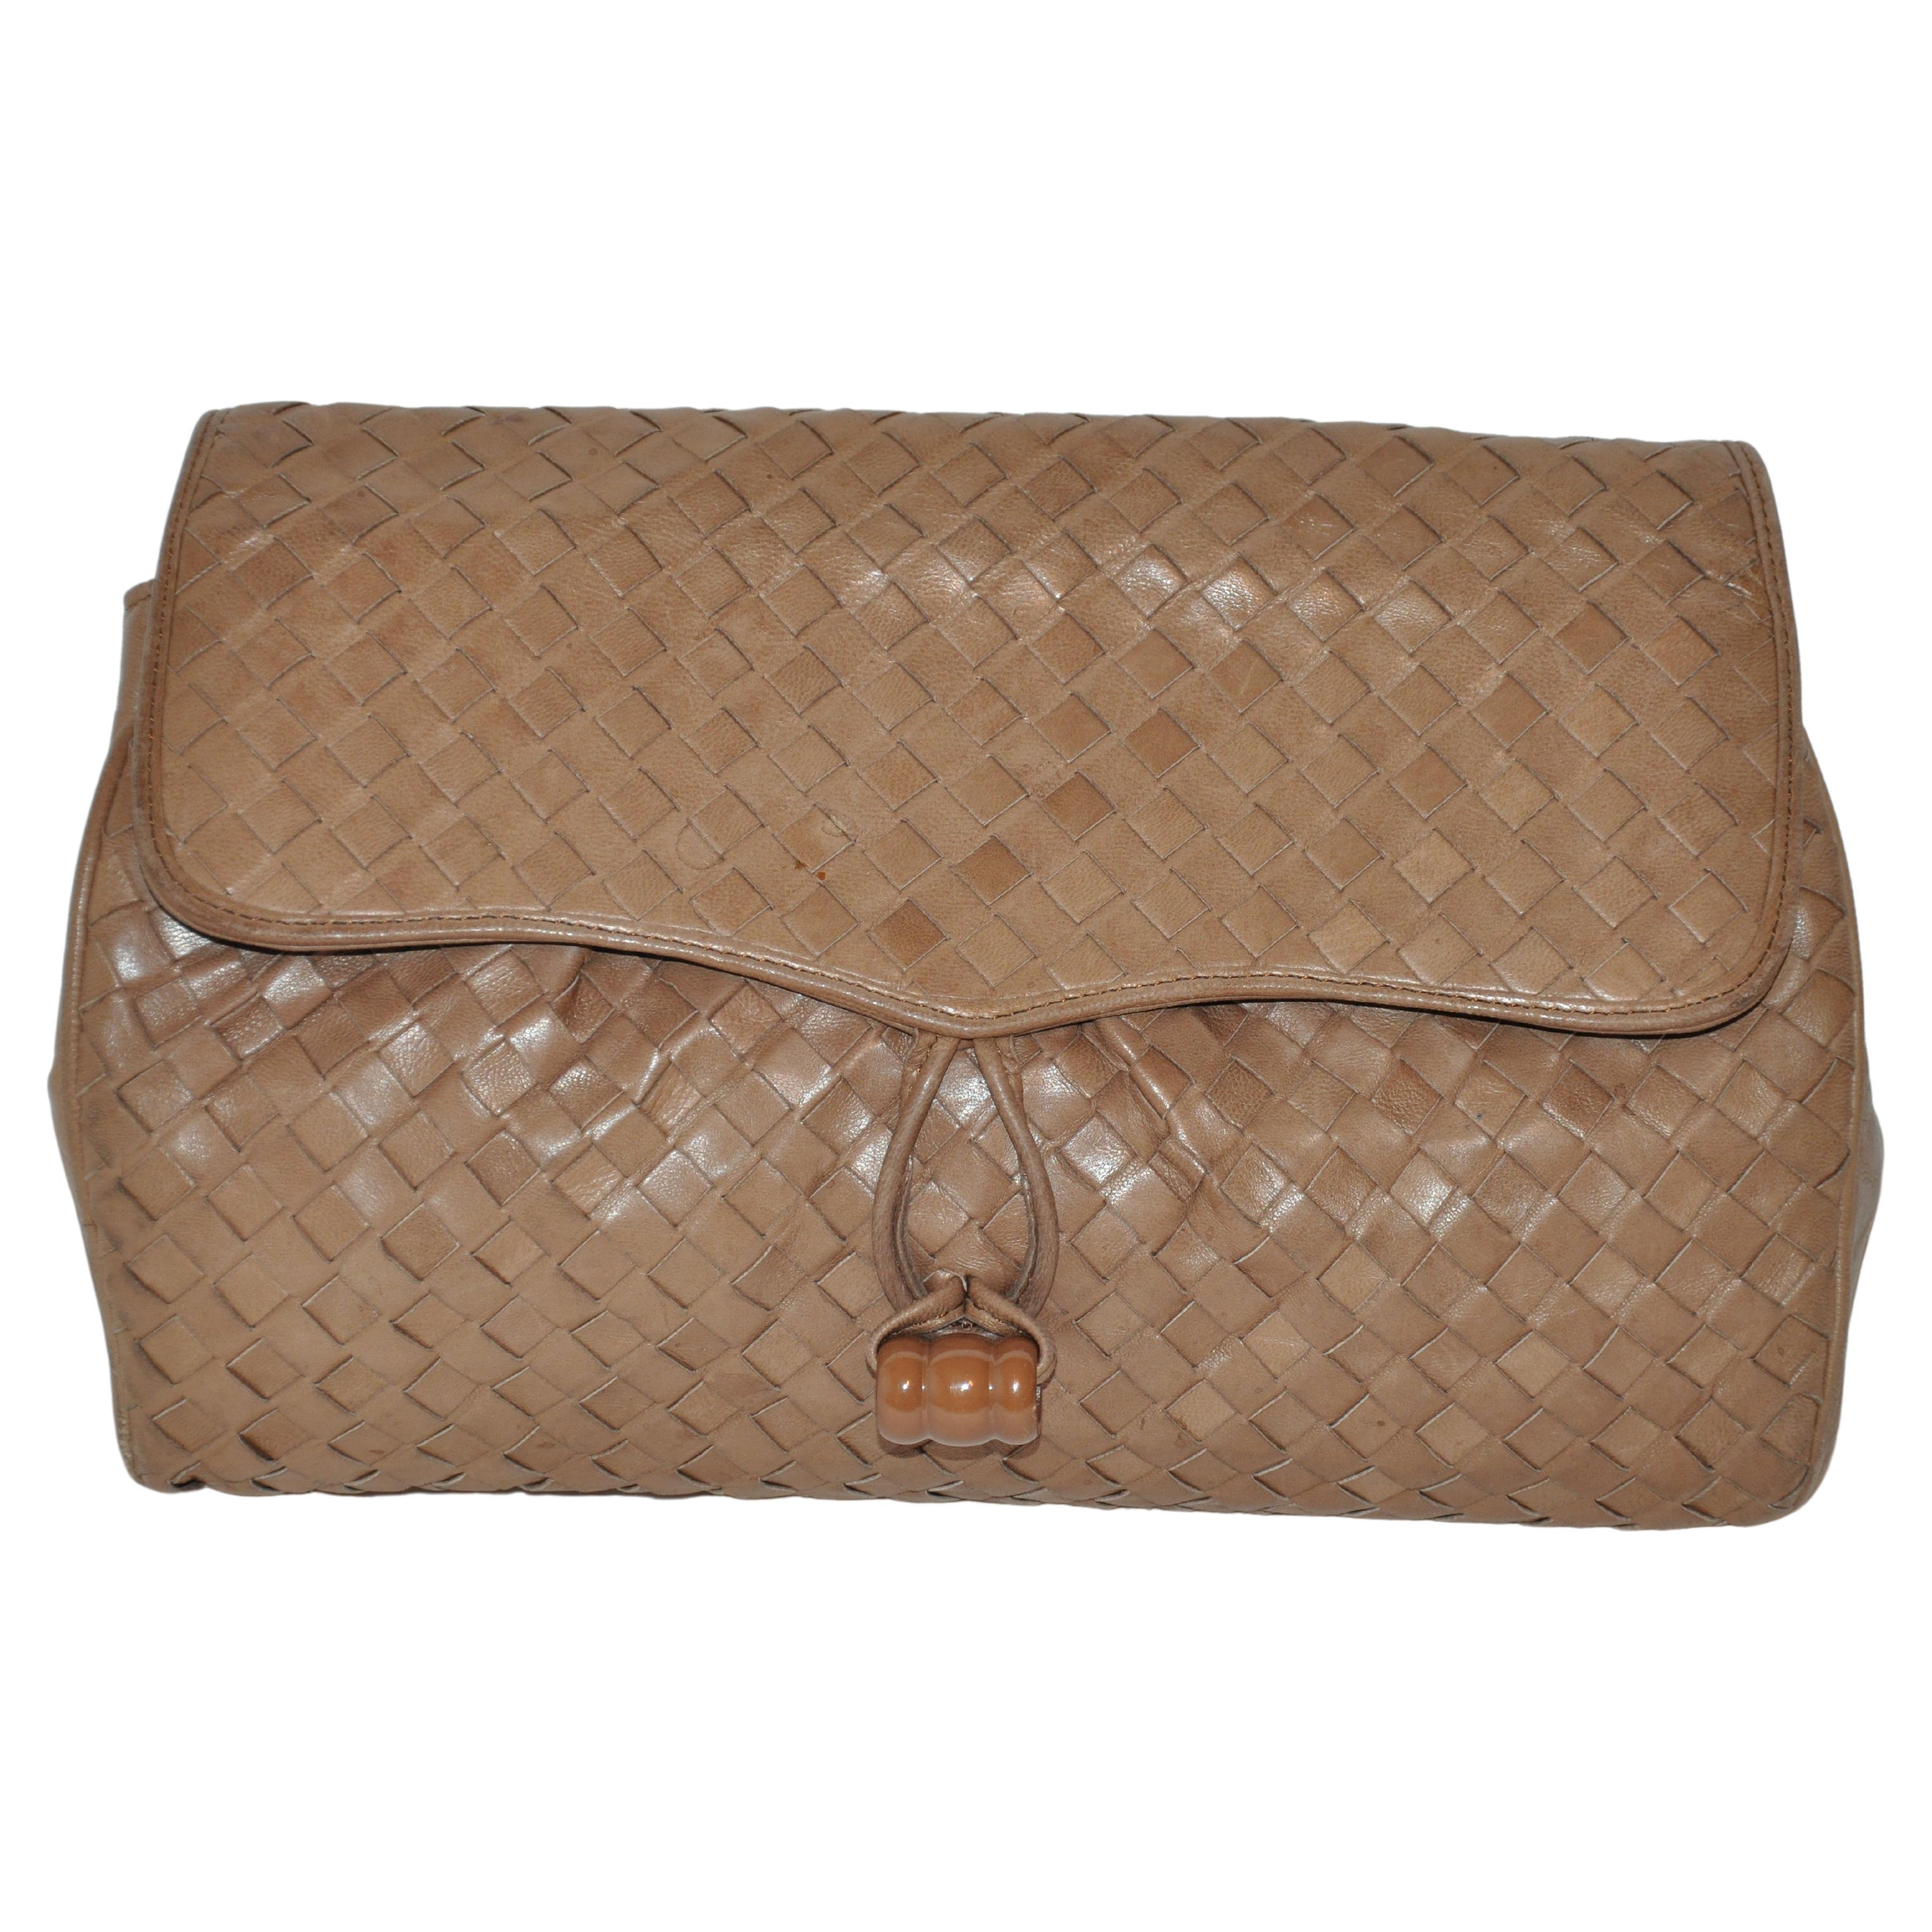 Taupe Woven Lambskin "Flap-Over" Closure Front Optional Clutch or Shoulder Bag